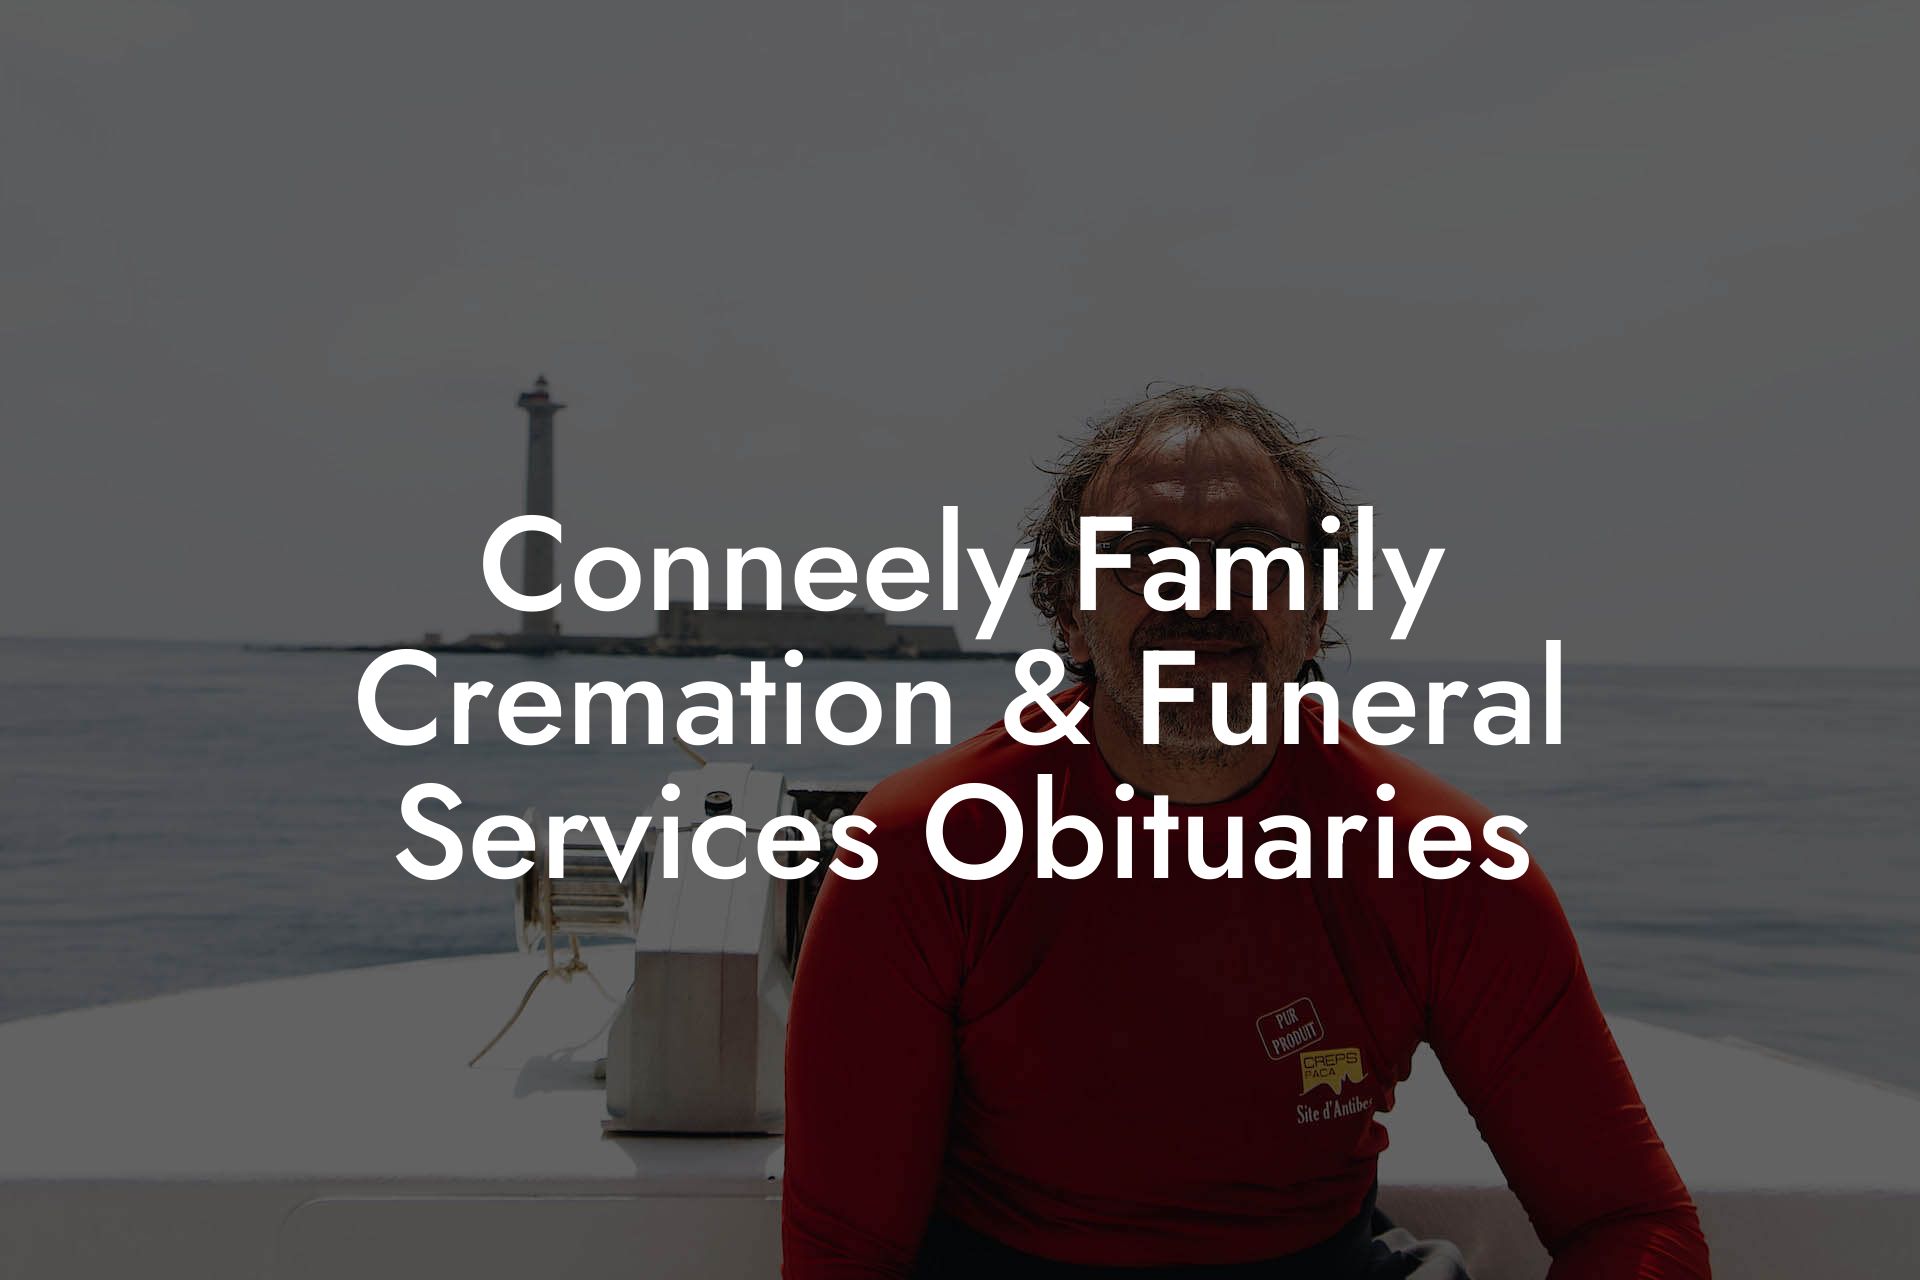 Conneely Family Cremation & Funeral Services Obituaries